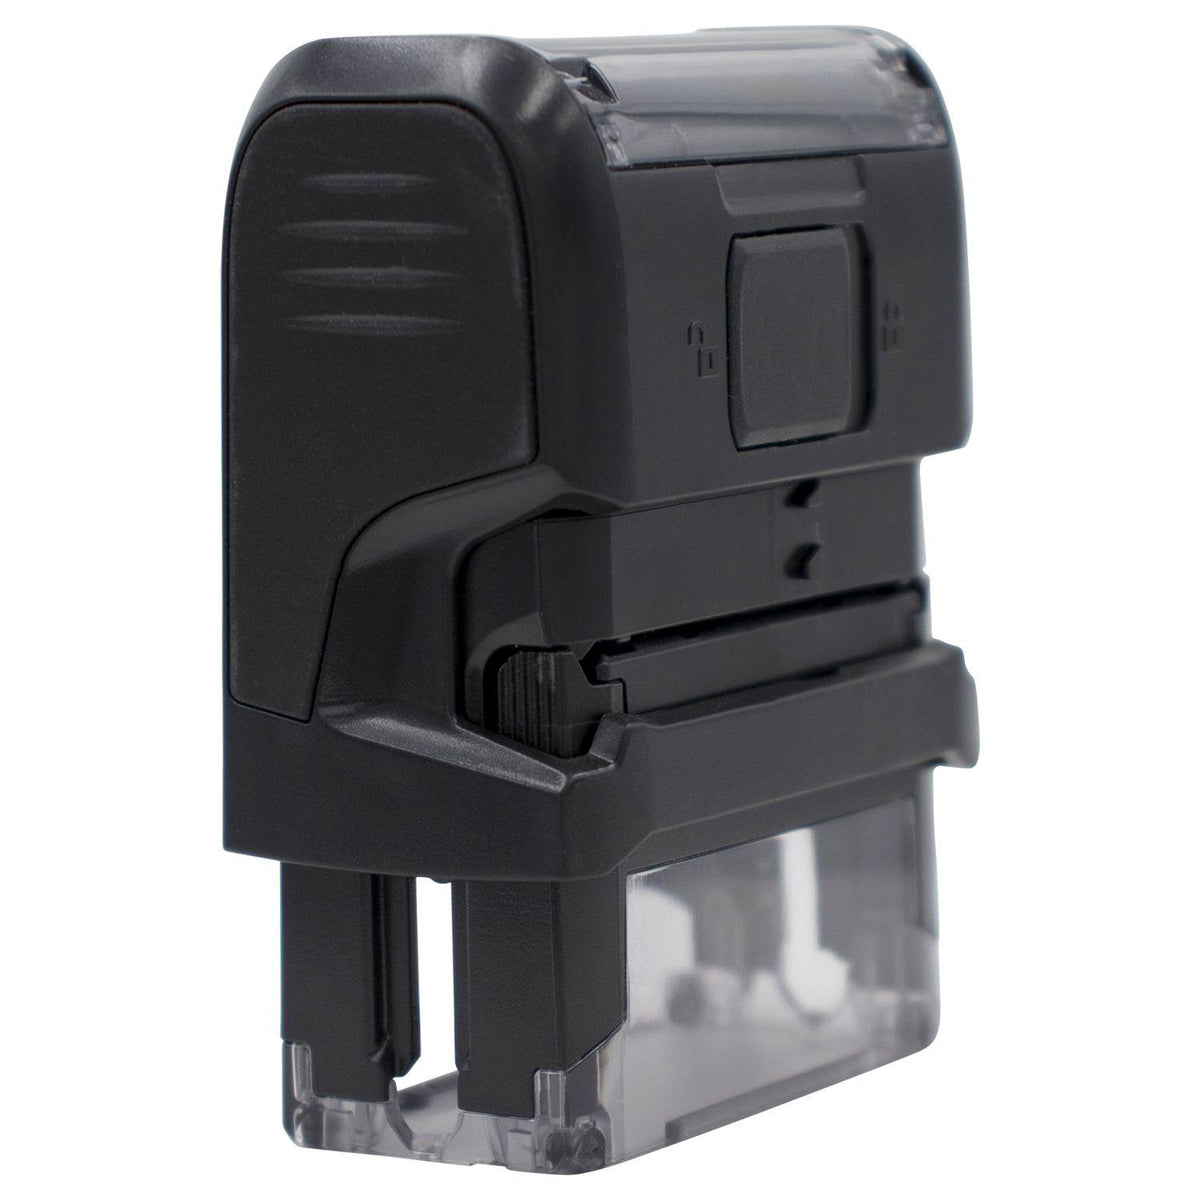 Self-Inking For Official Use Only Stamp - Engineer Seal Stamps - Brand_Trodat, Impression Size_Small, Stamp Type_Self-Inking Stamp, Type of Use_Business, Type of Use_Legal, Type of Use_Office, Type of Use_Professional